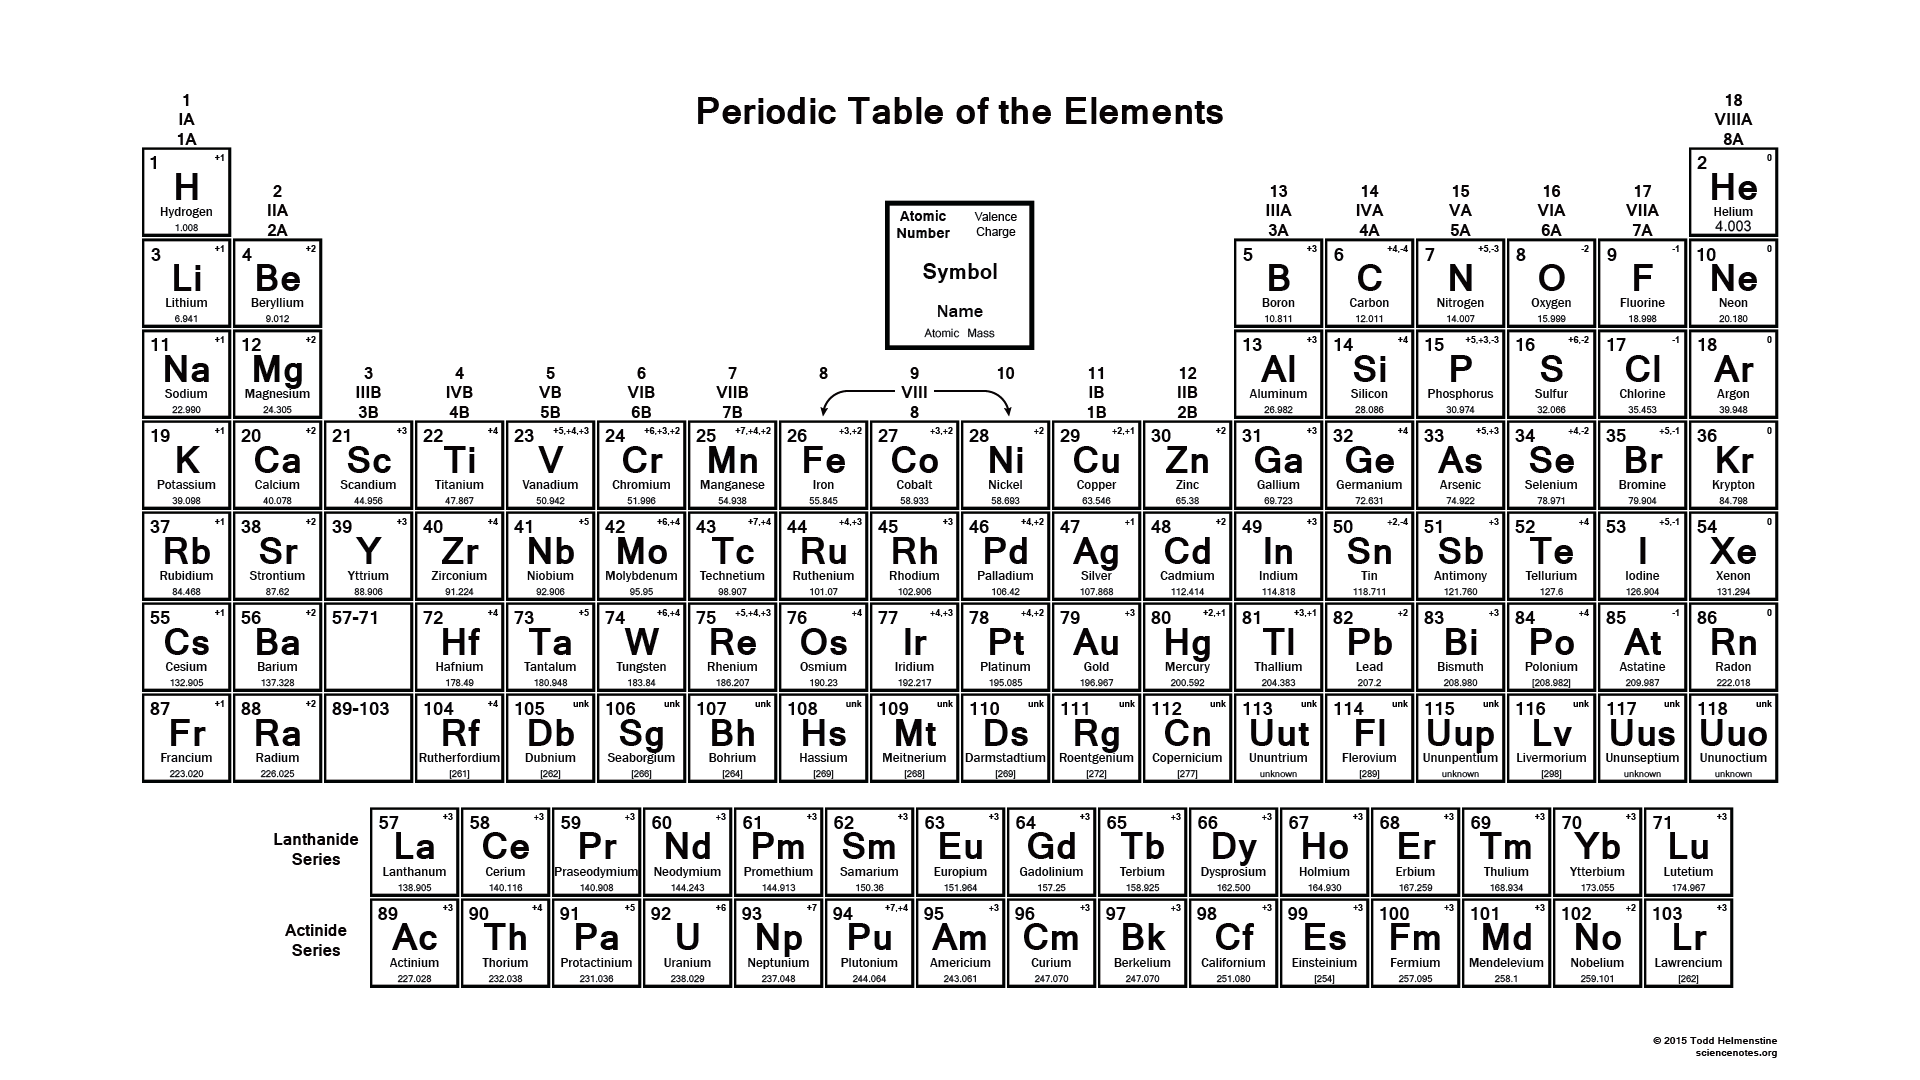 Printable periodic table labeled. Download them or print